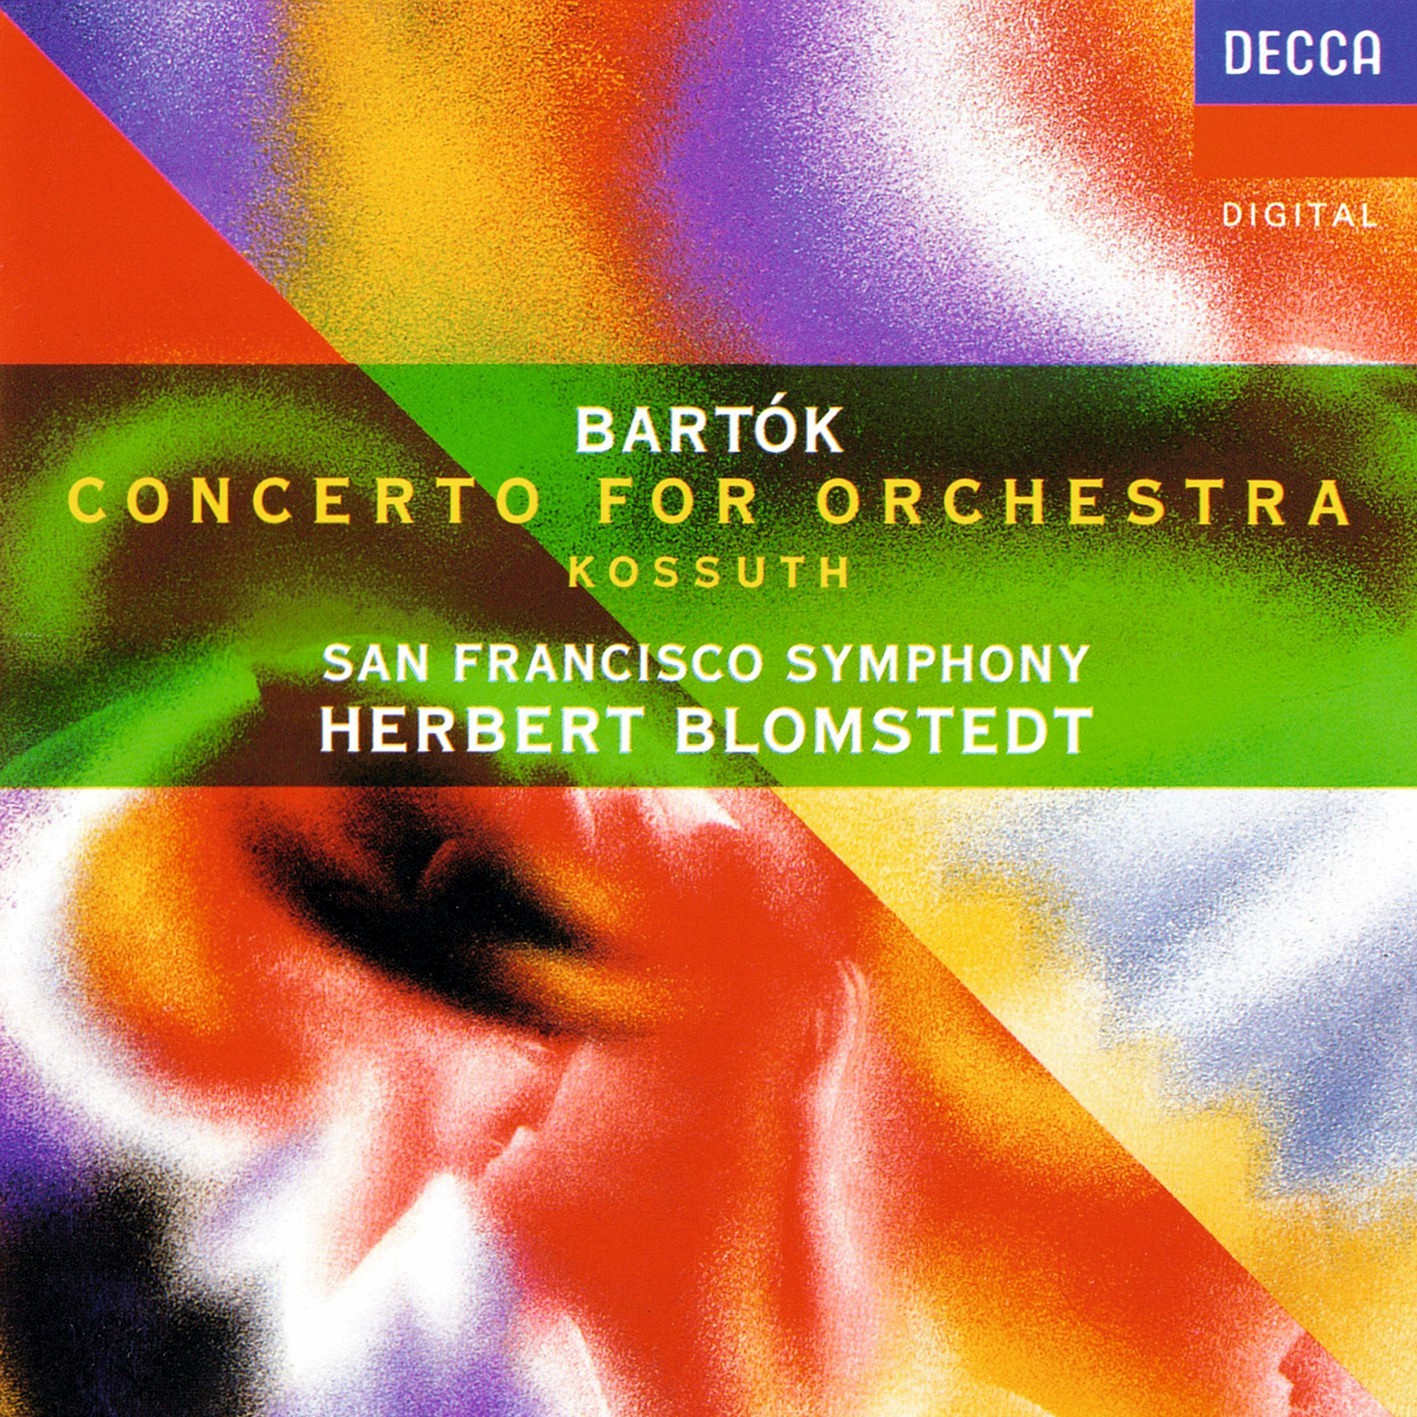 In the wake of Bartók